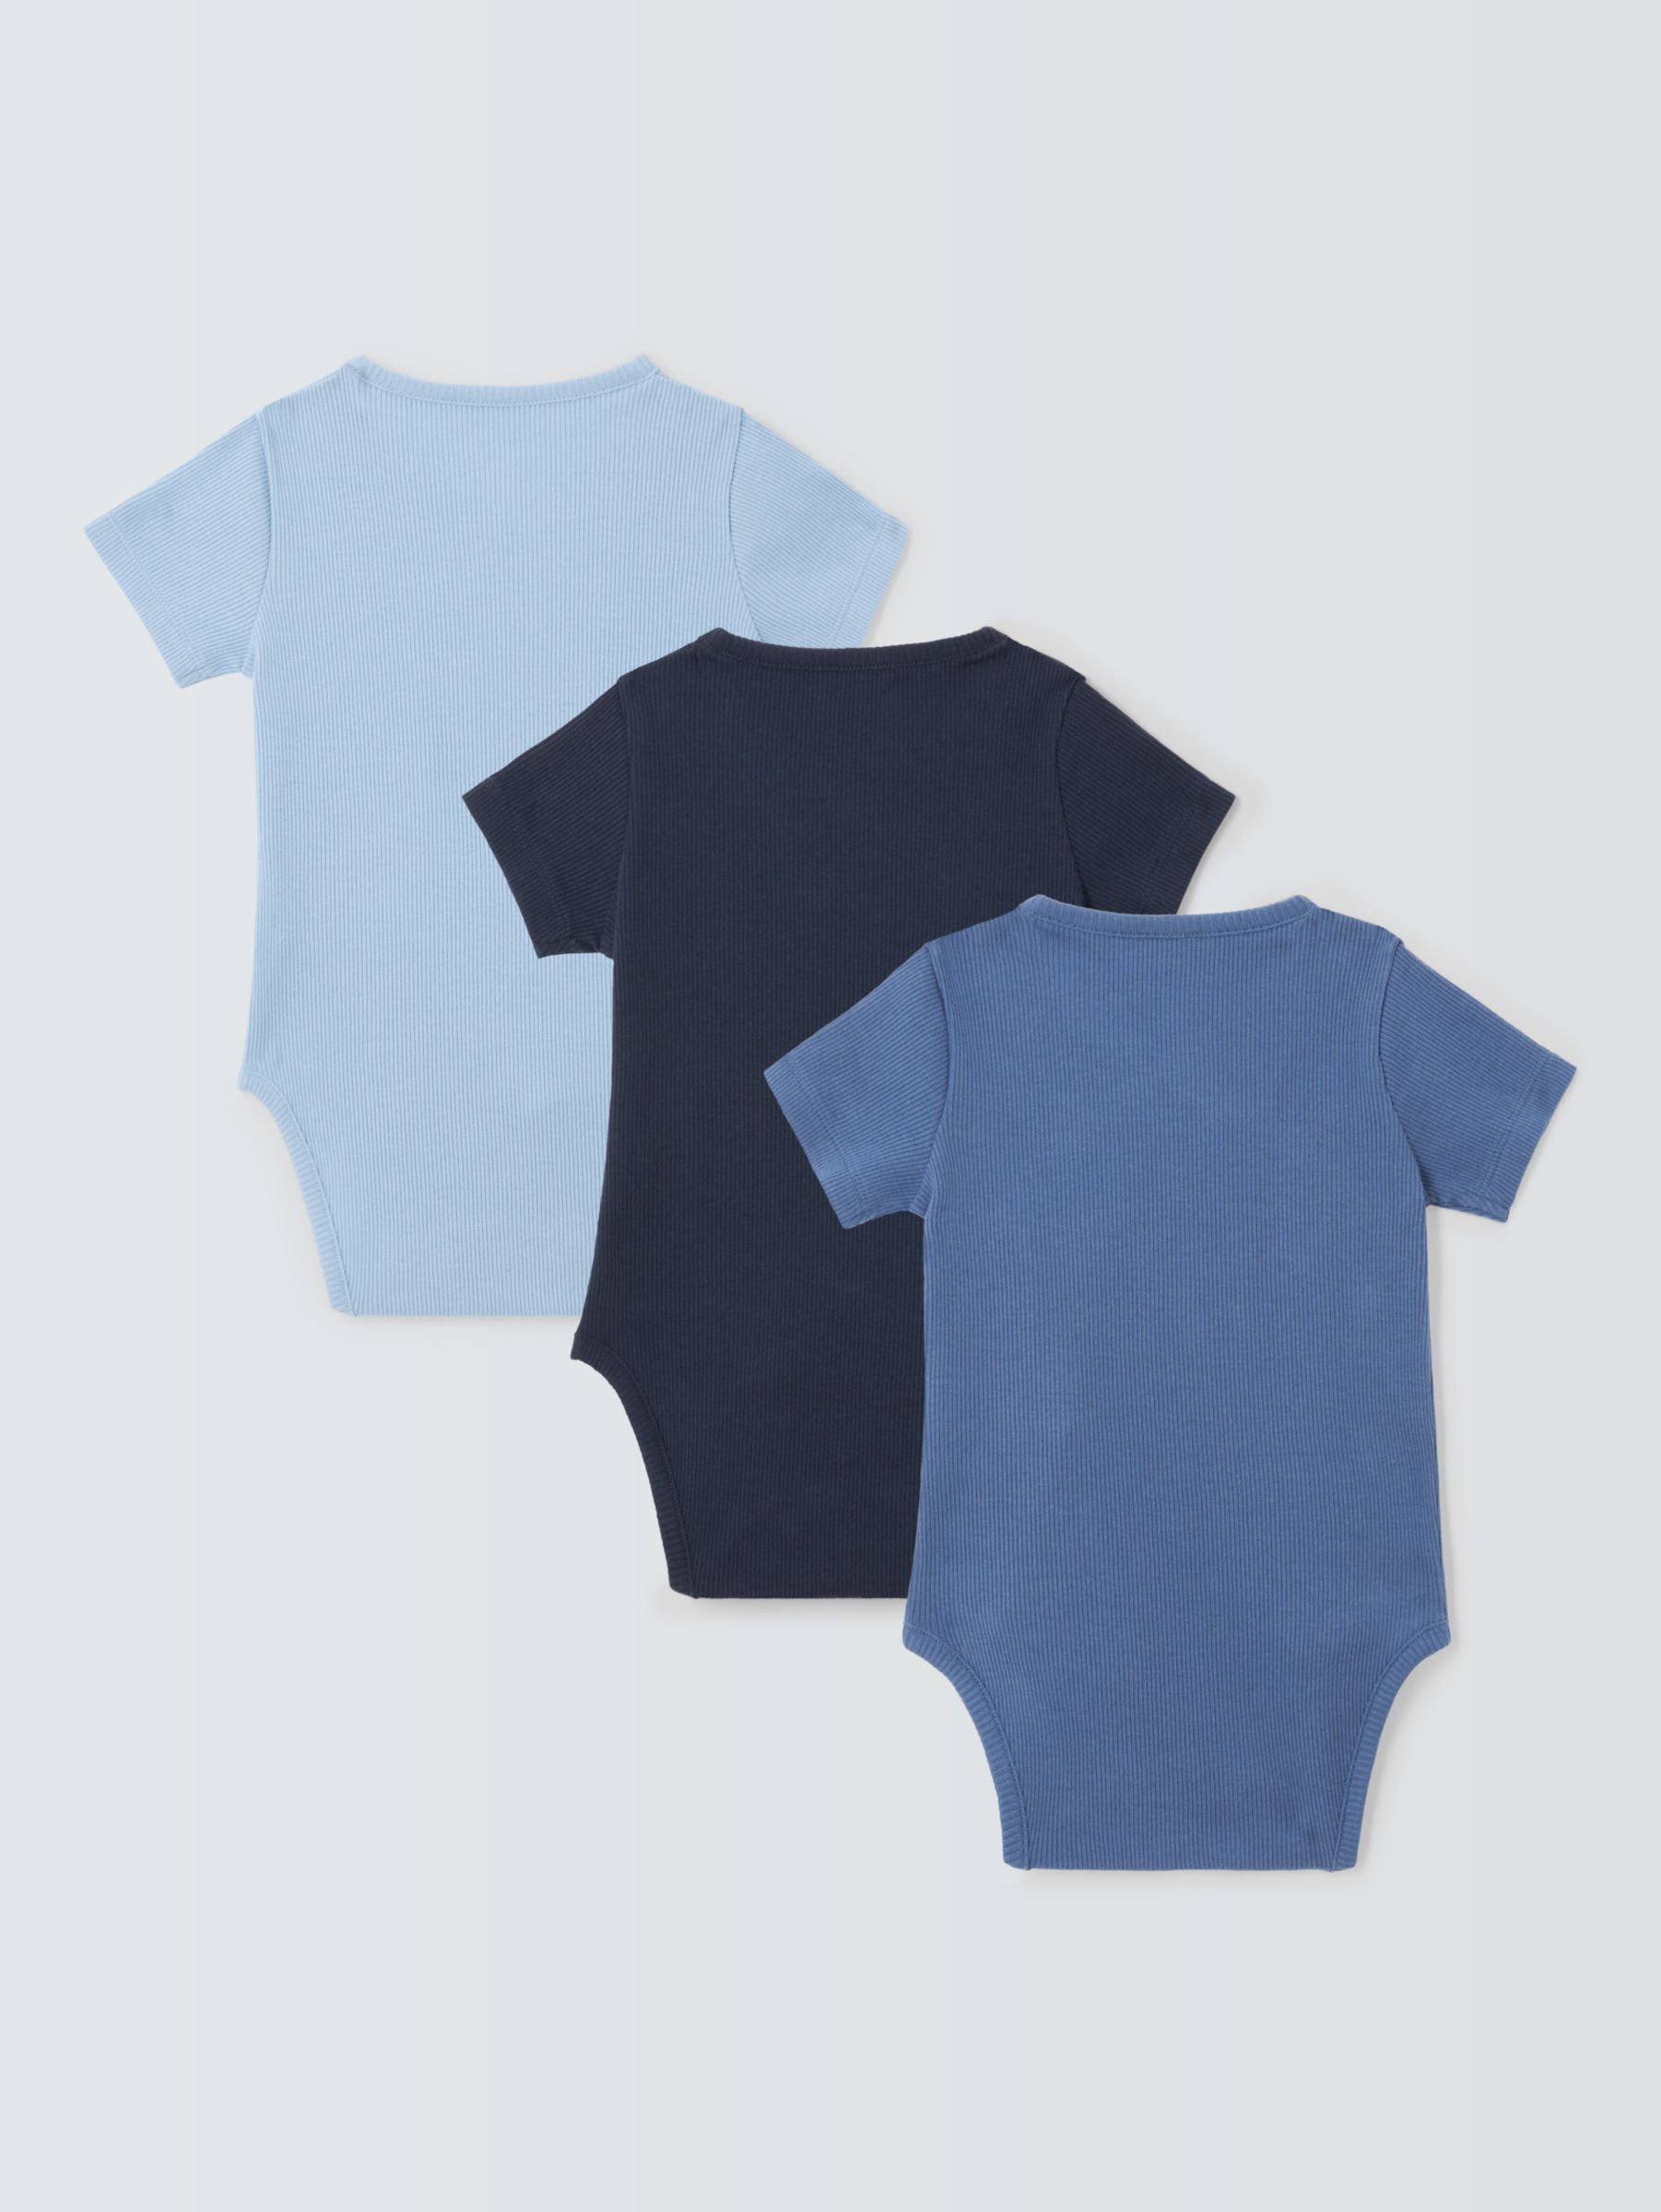 John Lewis Baby Ribbed Cotton Bodysuit, Pack of 3, Blue/Multi, 9-12 months